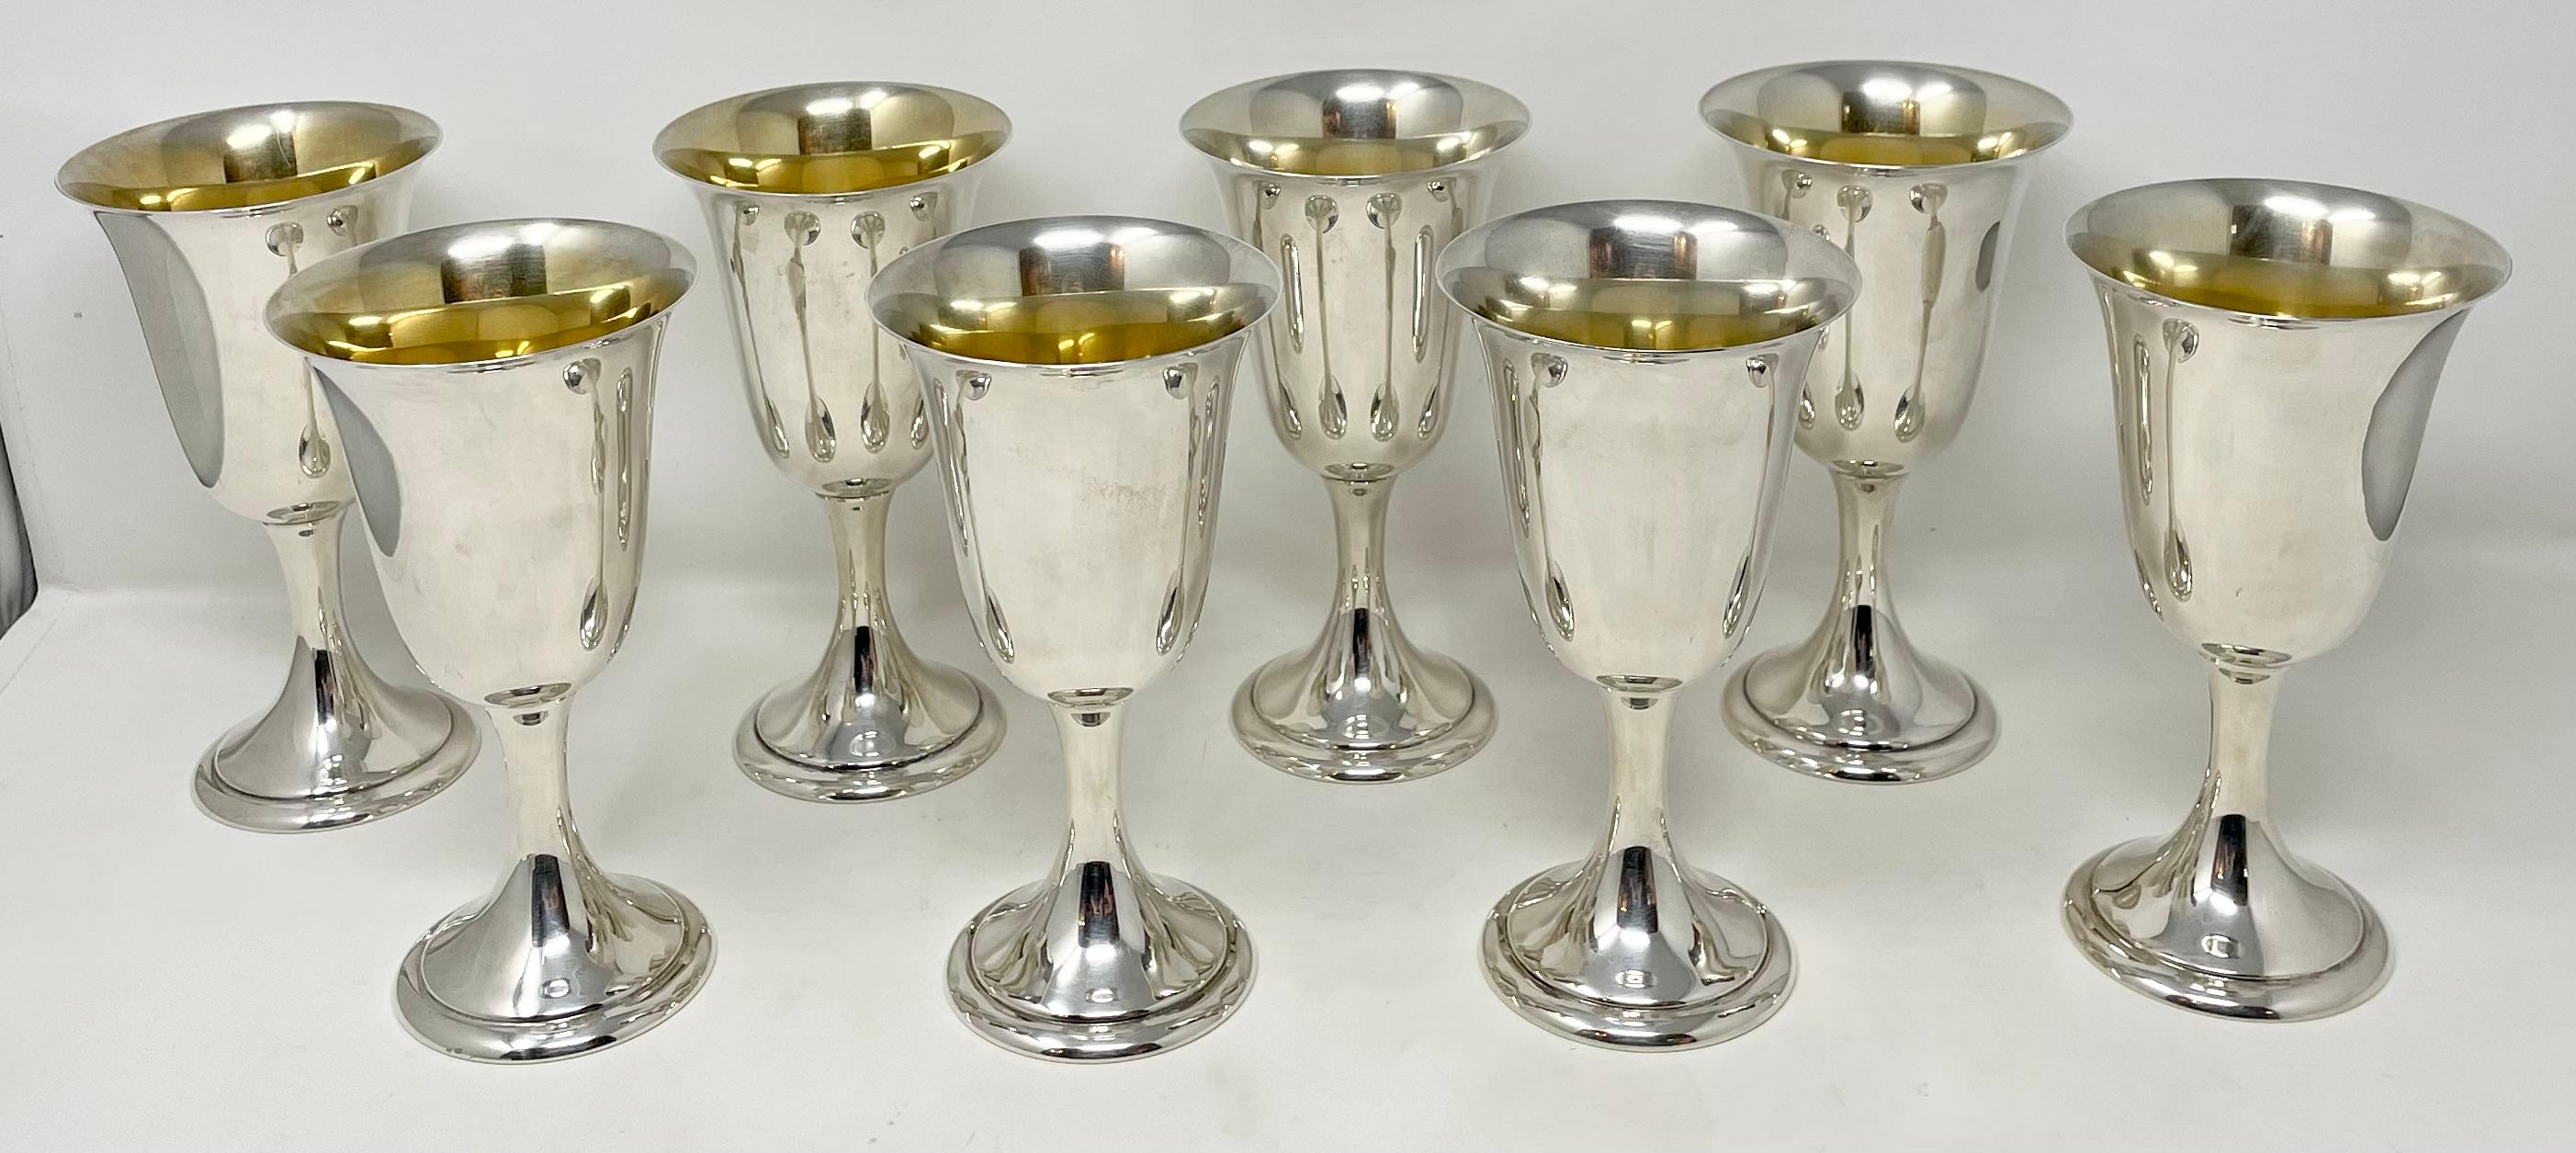 Set of 8 Estate Italian sterling silver wine or water goblets, circa 1950-1960.